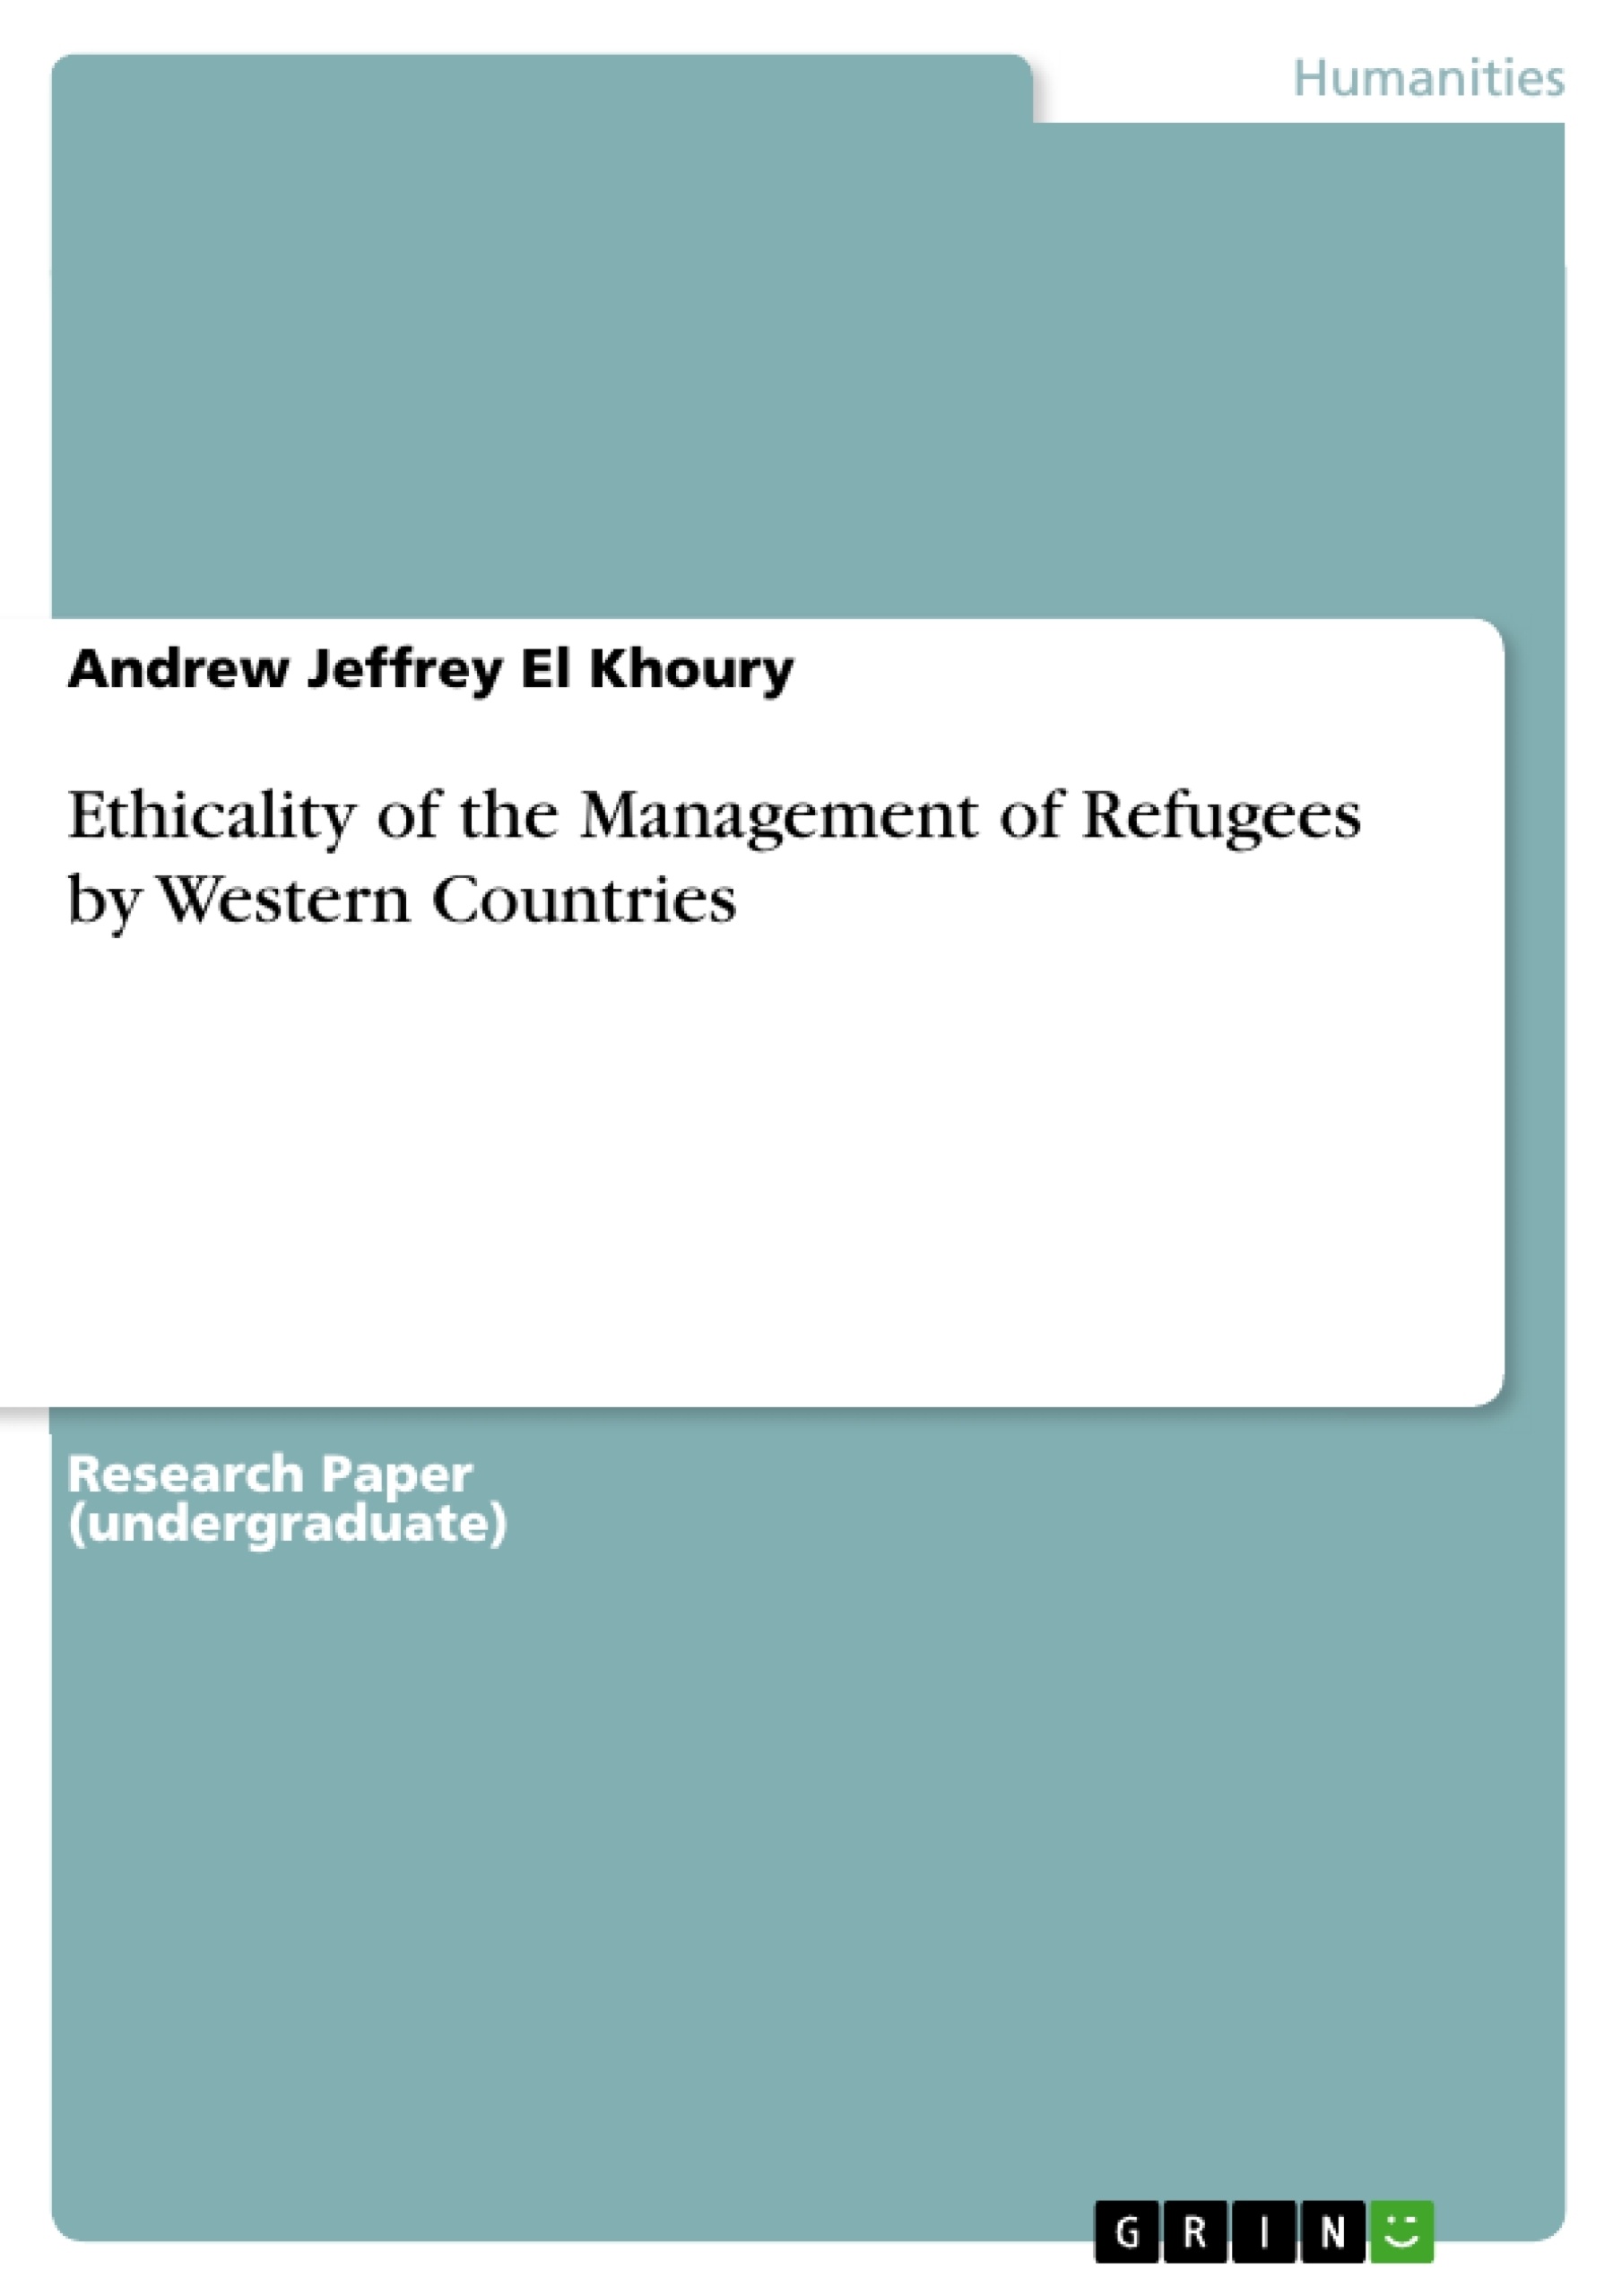 Título: Ethicality of the Management of Refugees by Western Countries